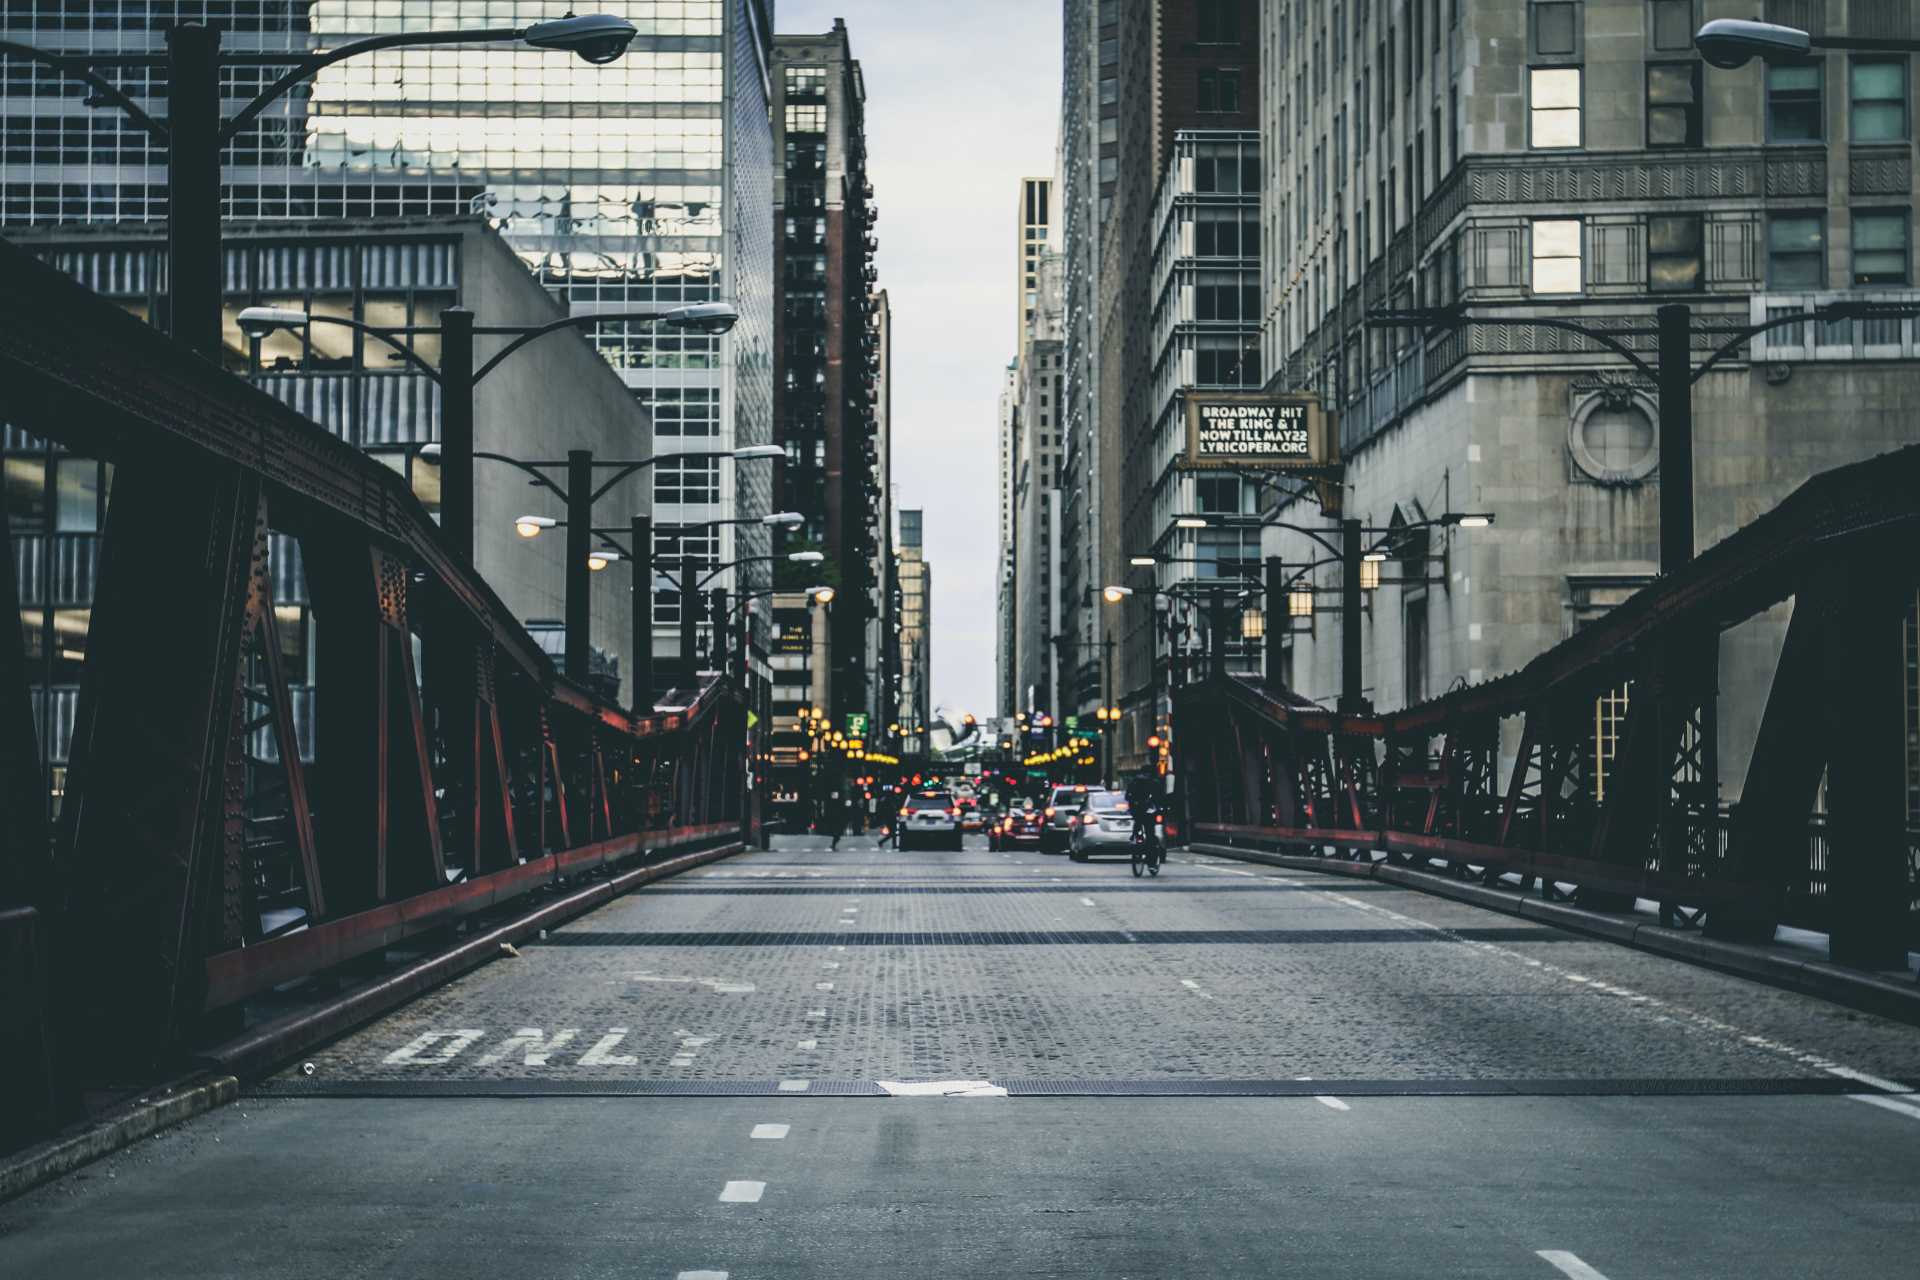 Photograph taken in the center of a busy bridge in Chicago's Loop.